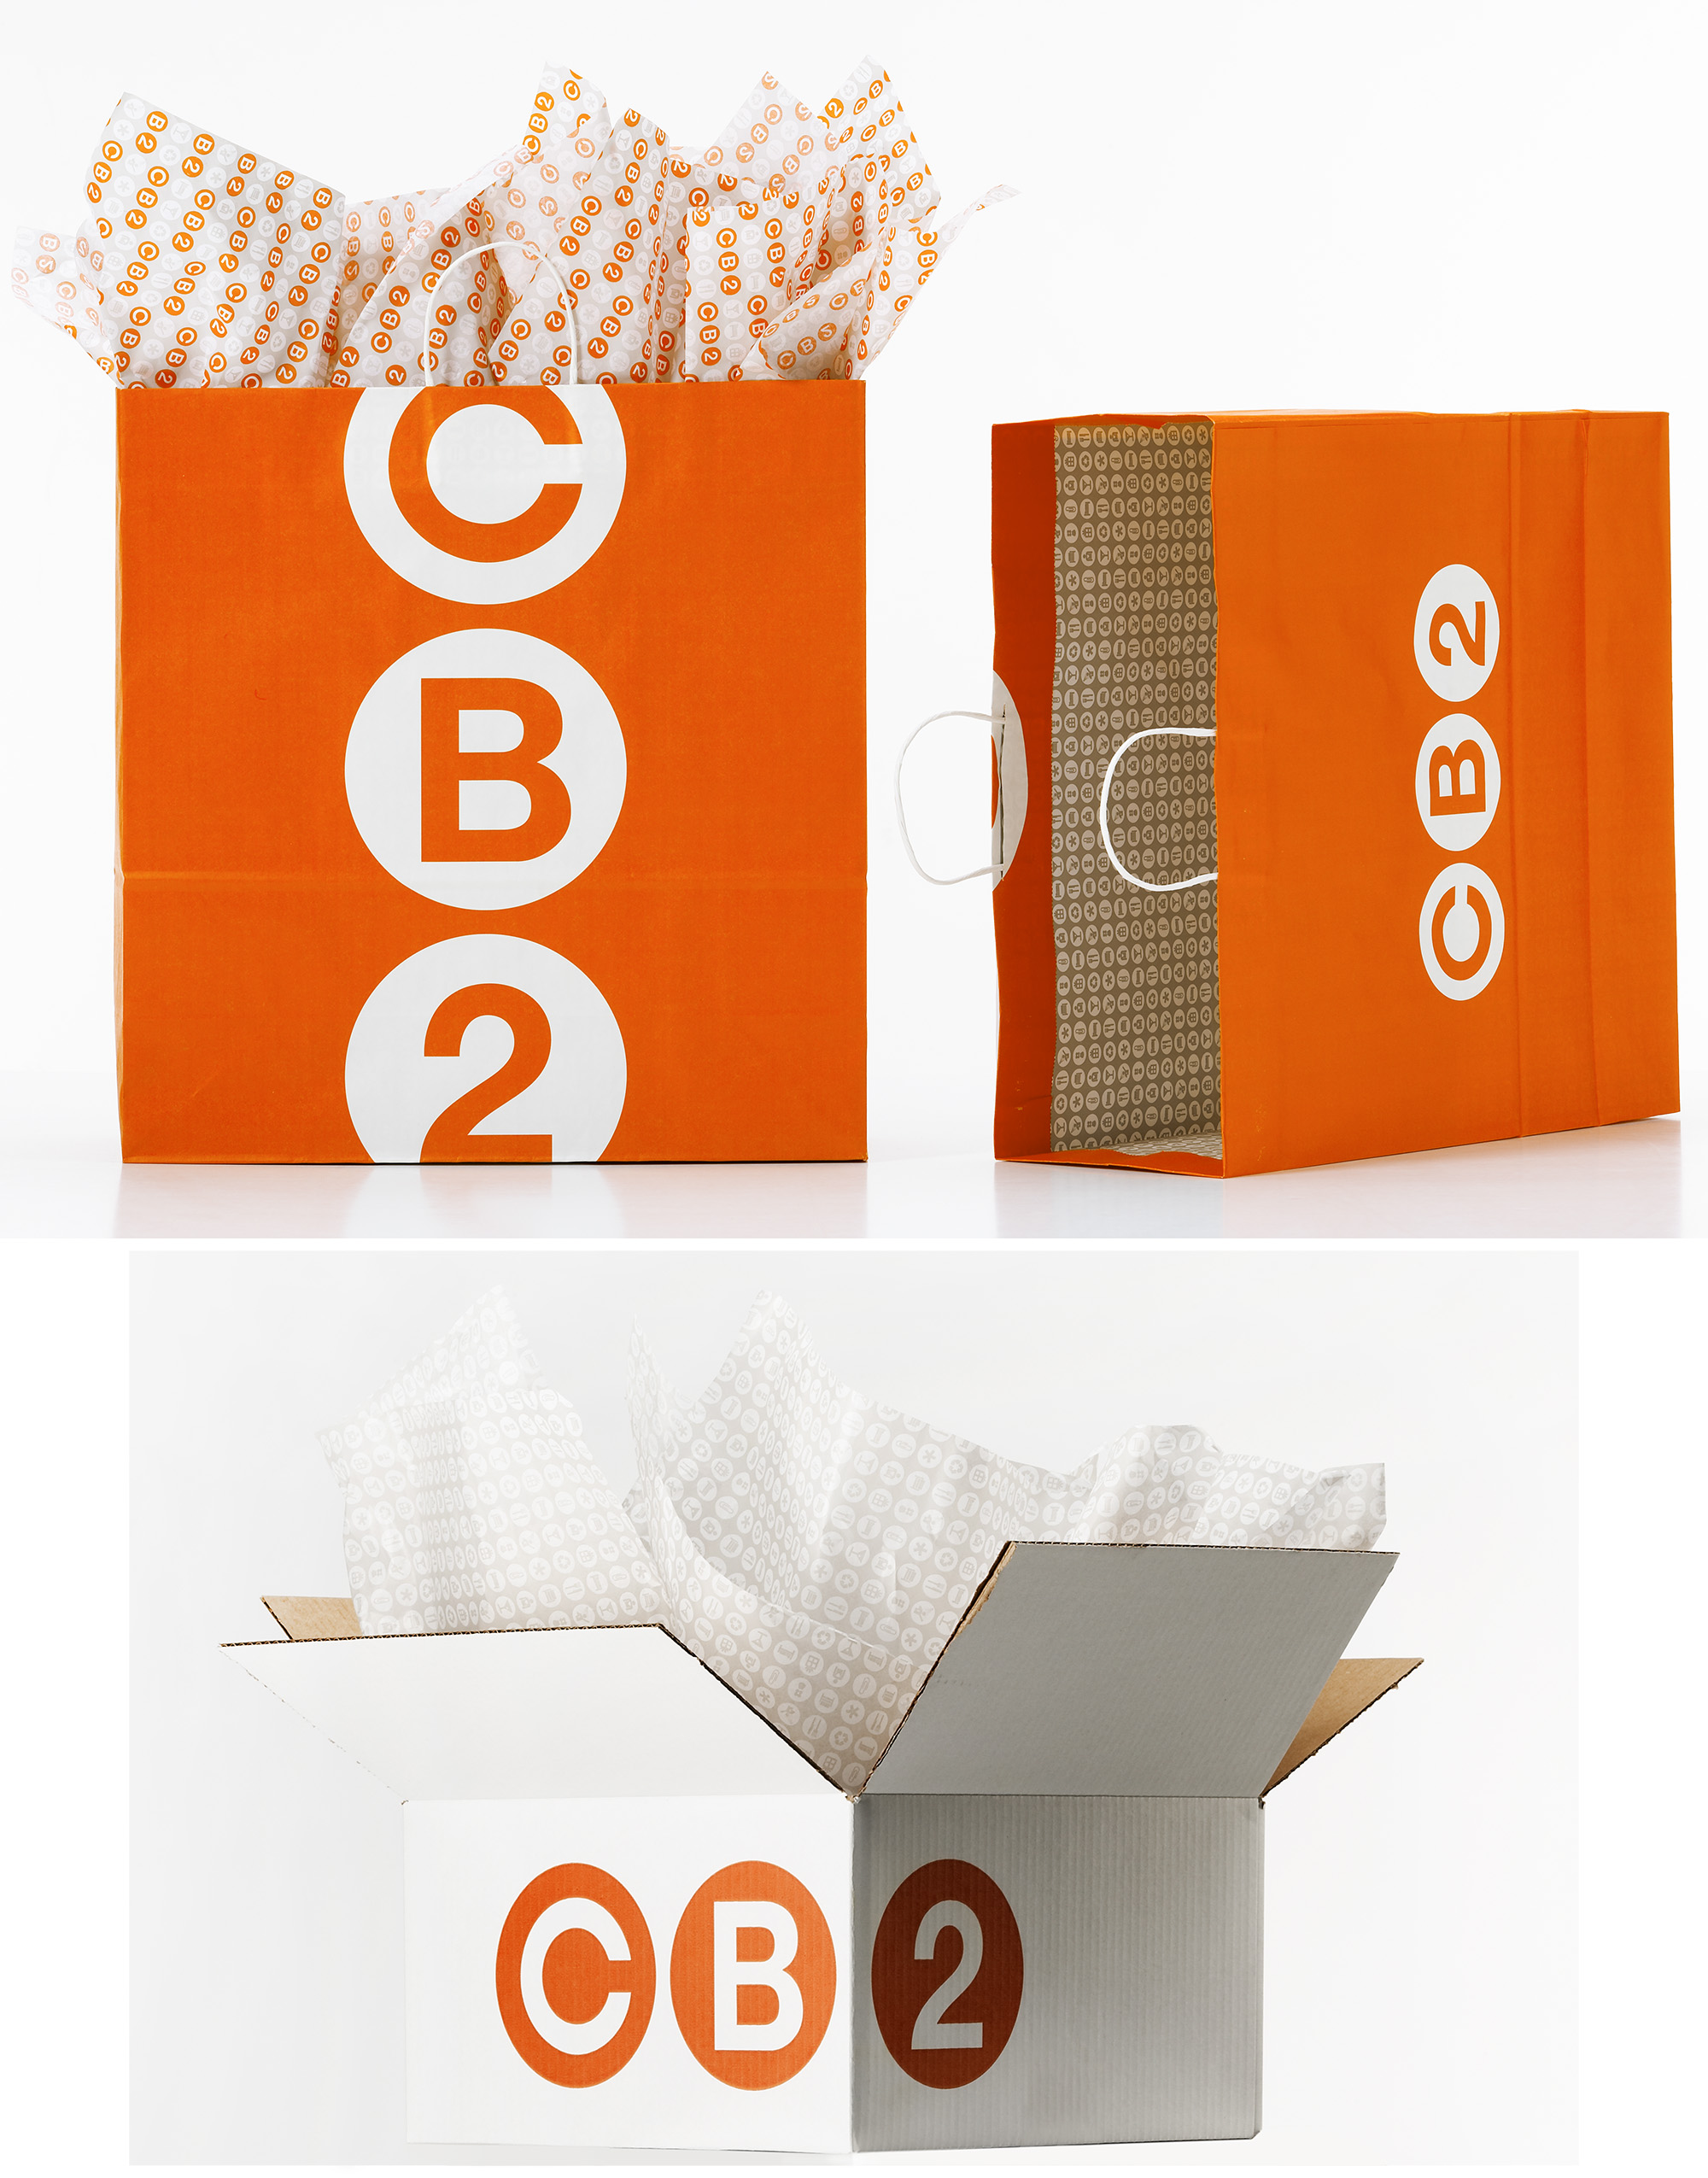 CB2 Store Packaging